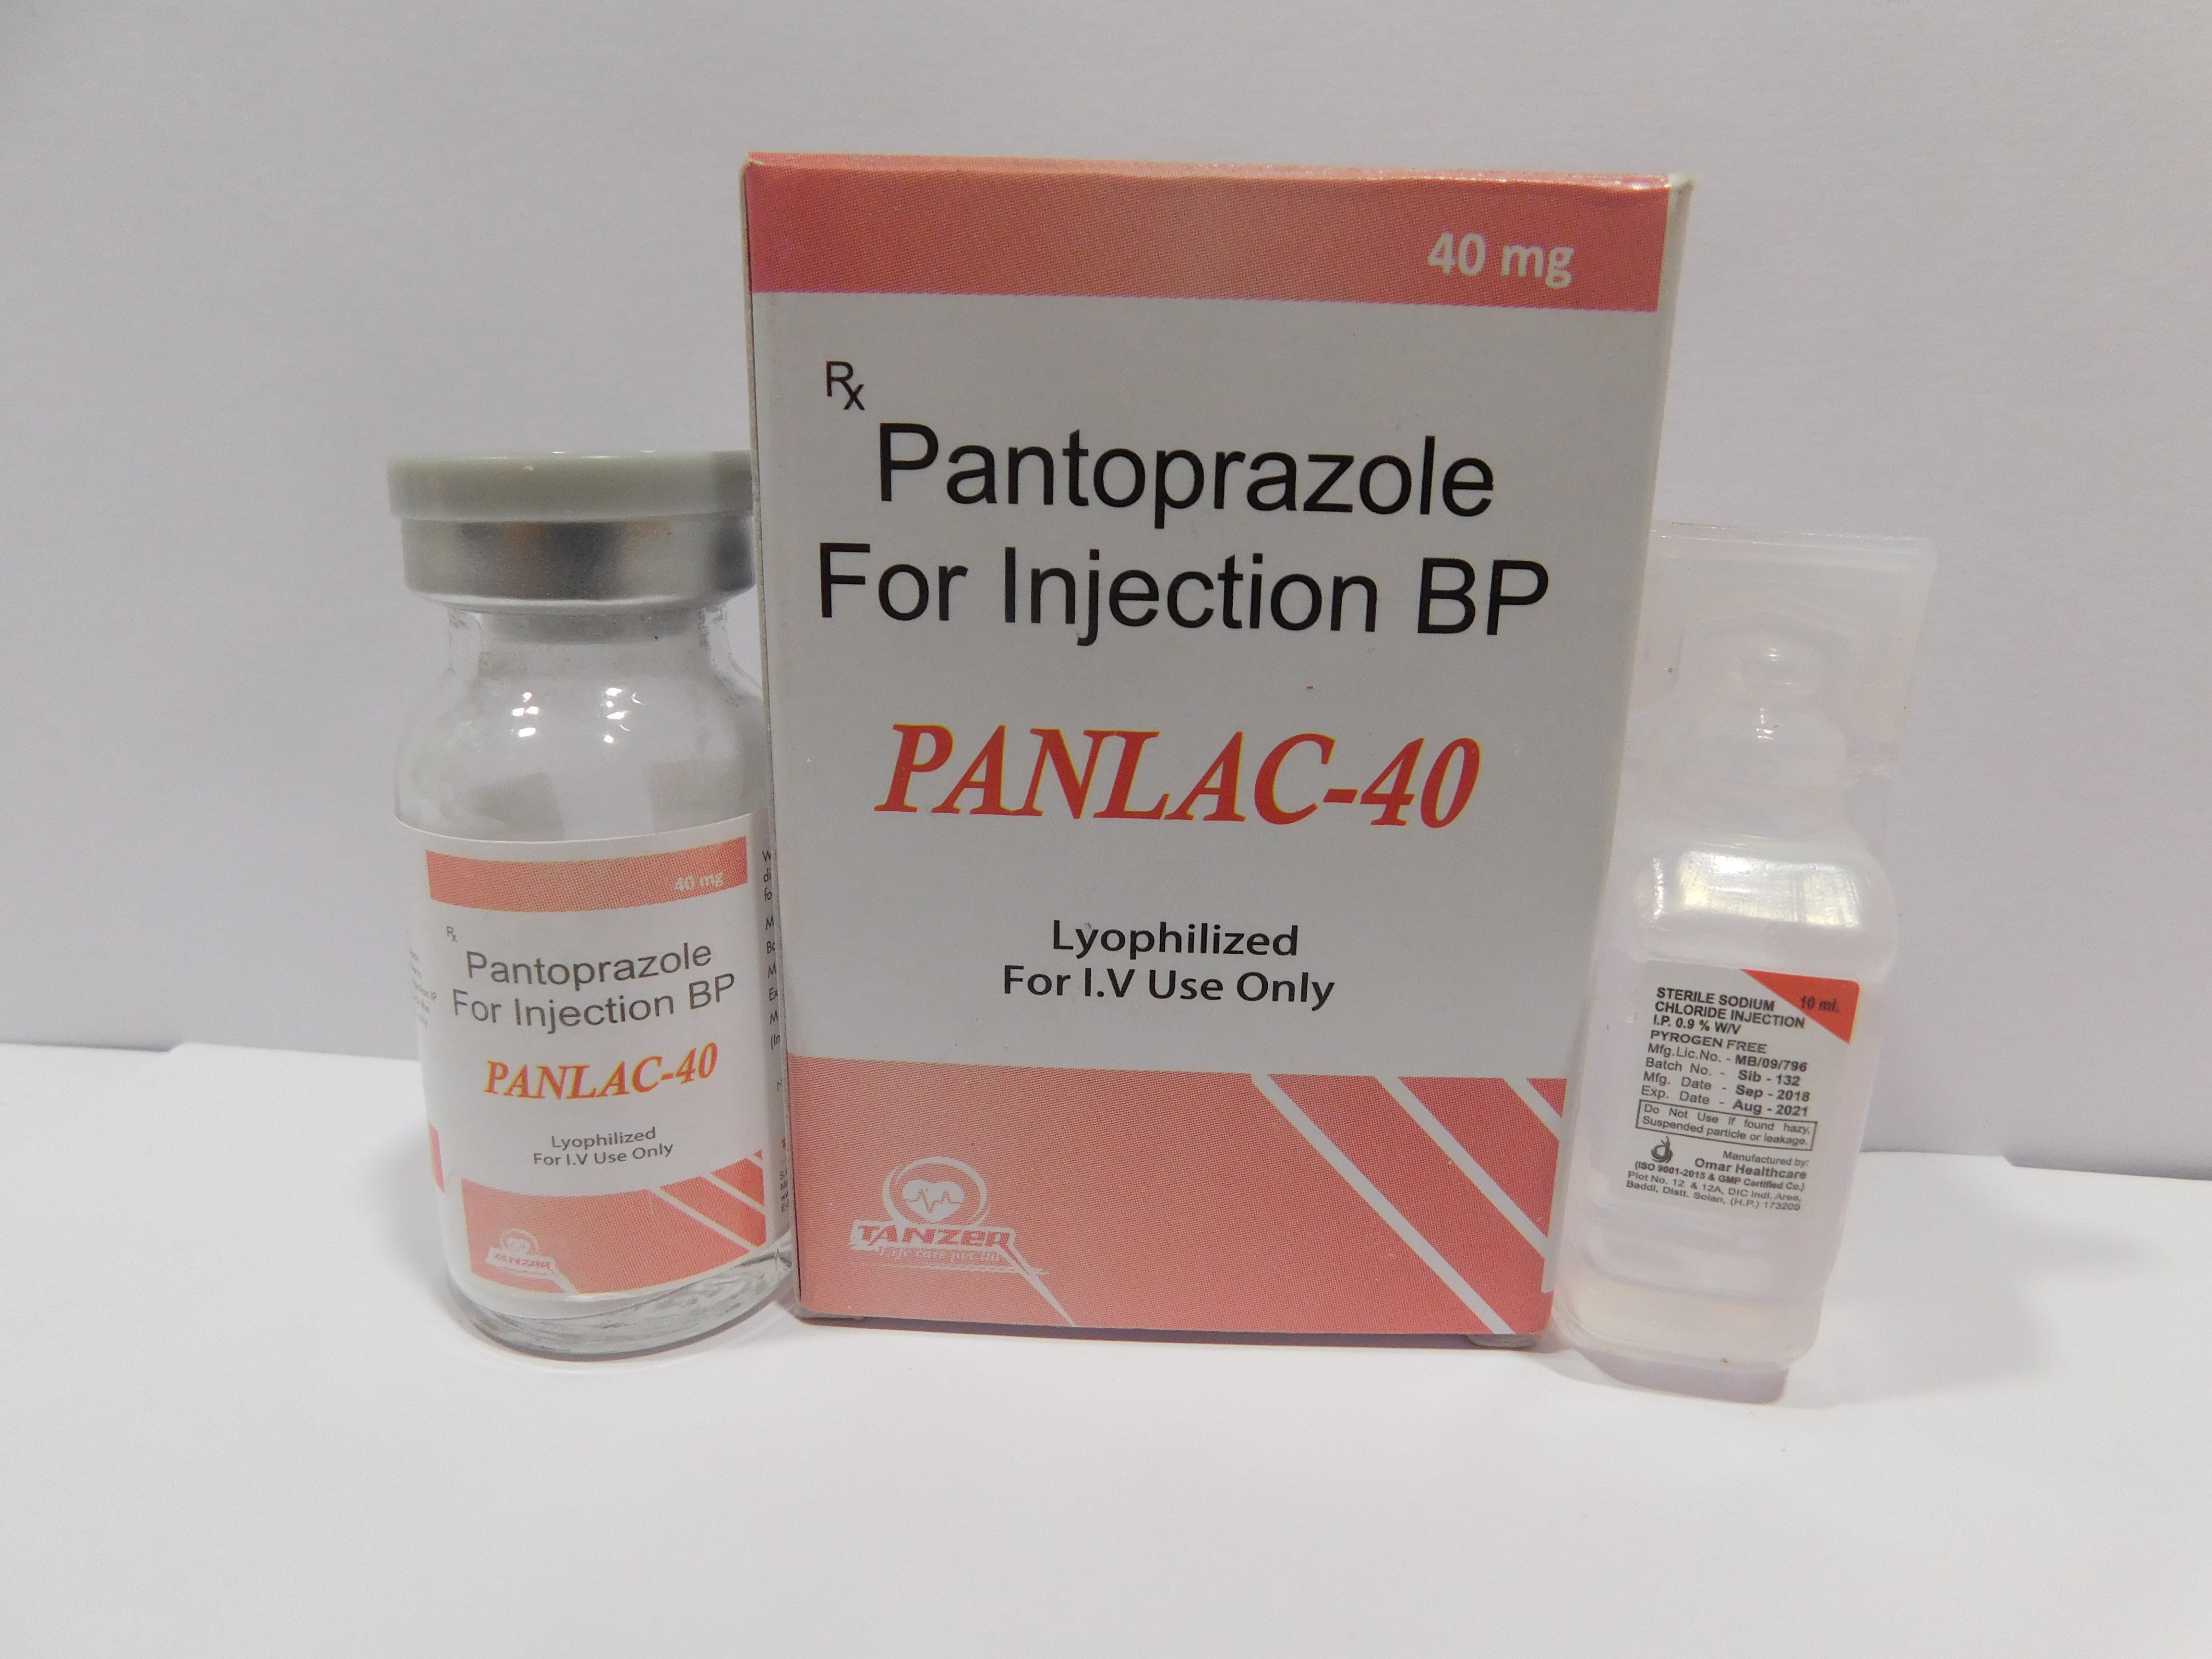 Product Name: PANLAC 40, Compositions of PANLAC 40 are Pantoprazole for Injection BP - Tanzer Lifecare Private Limited